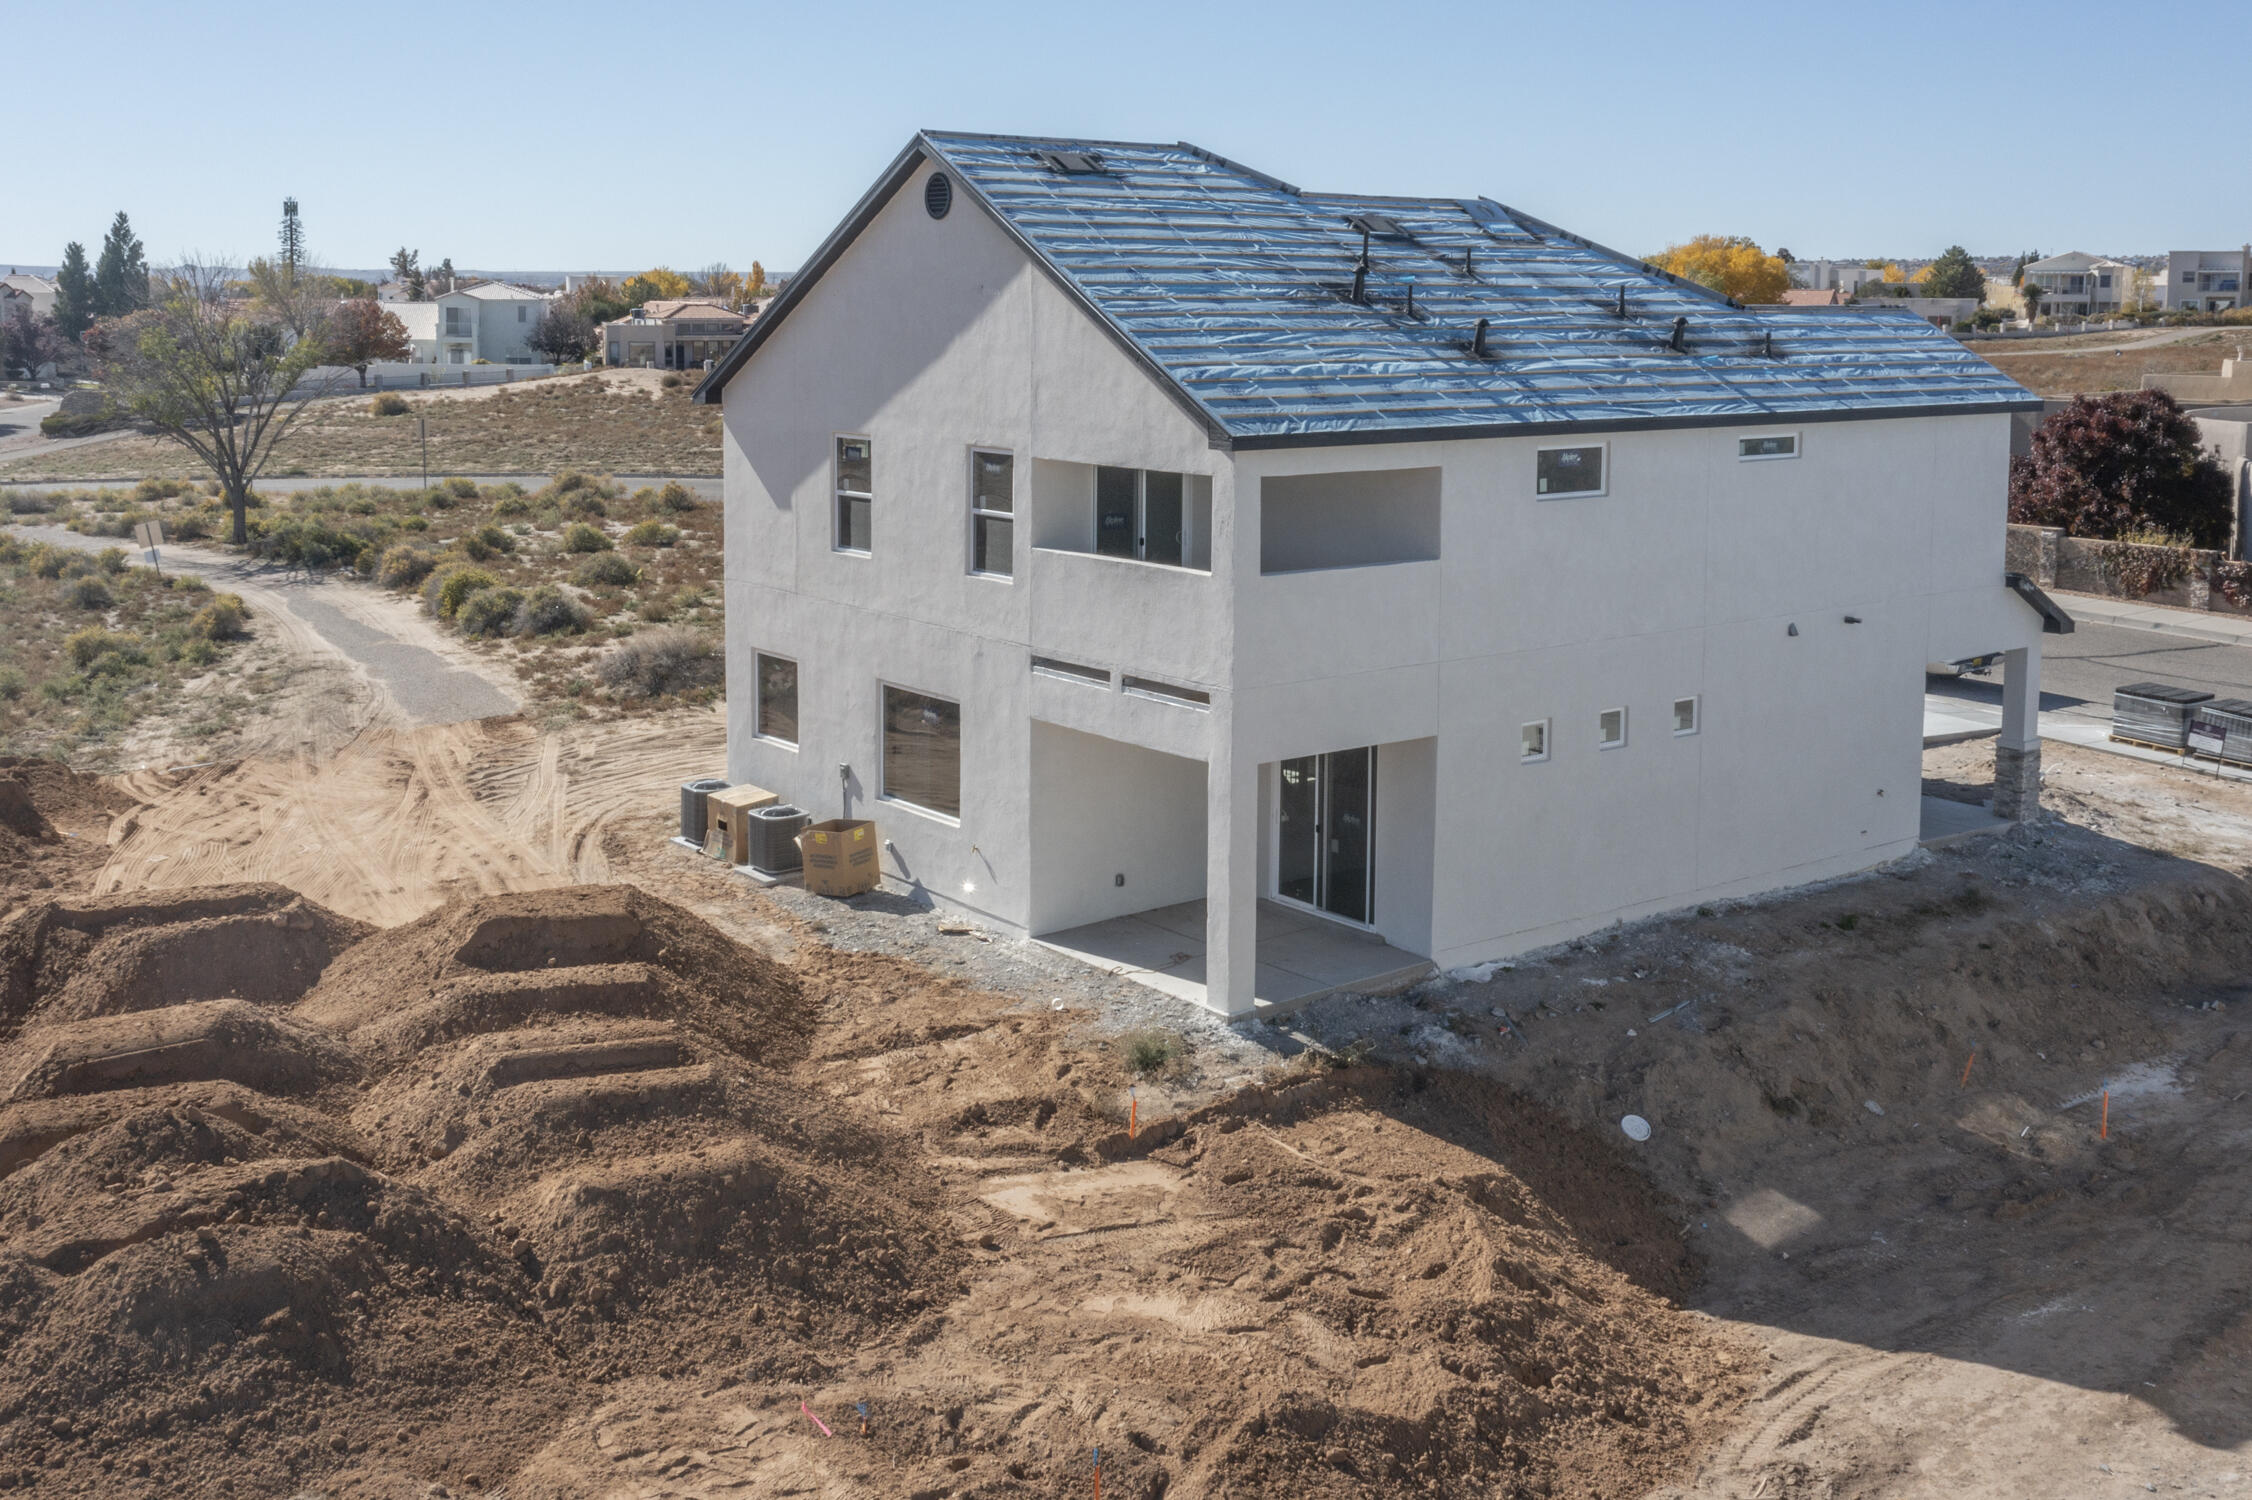 ASK ABOUT THE BUILDER INCENTIVES! Located at 344 Pinnacle Dr SE Rio Rancho you will find the Taos floorplan offered by Amreston Homes. Inside this 2354 Sqft Floorplan you will find 3 spacious bedrooms (including one of the largest Owners Suites Amrestonhas to offer 22.5x13.5), an office, and 2.5 Baths. The lower level of this floorplan is perfect for entertaining. Each space flows to the next and includes a 1/2 bath to ensure personal privacy upstairs. All the standard features are sure to impress which include: 12x24 tile, Tiled showers to the ceiling, Granite, Stainless appliances including the fridge, and more! This home is under construction and some photos are not of the exact home, but rather examples of the floorplan and finish work of the builder. Finished product may vary ba